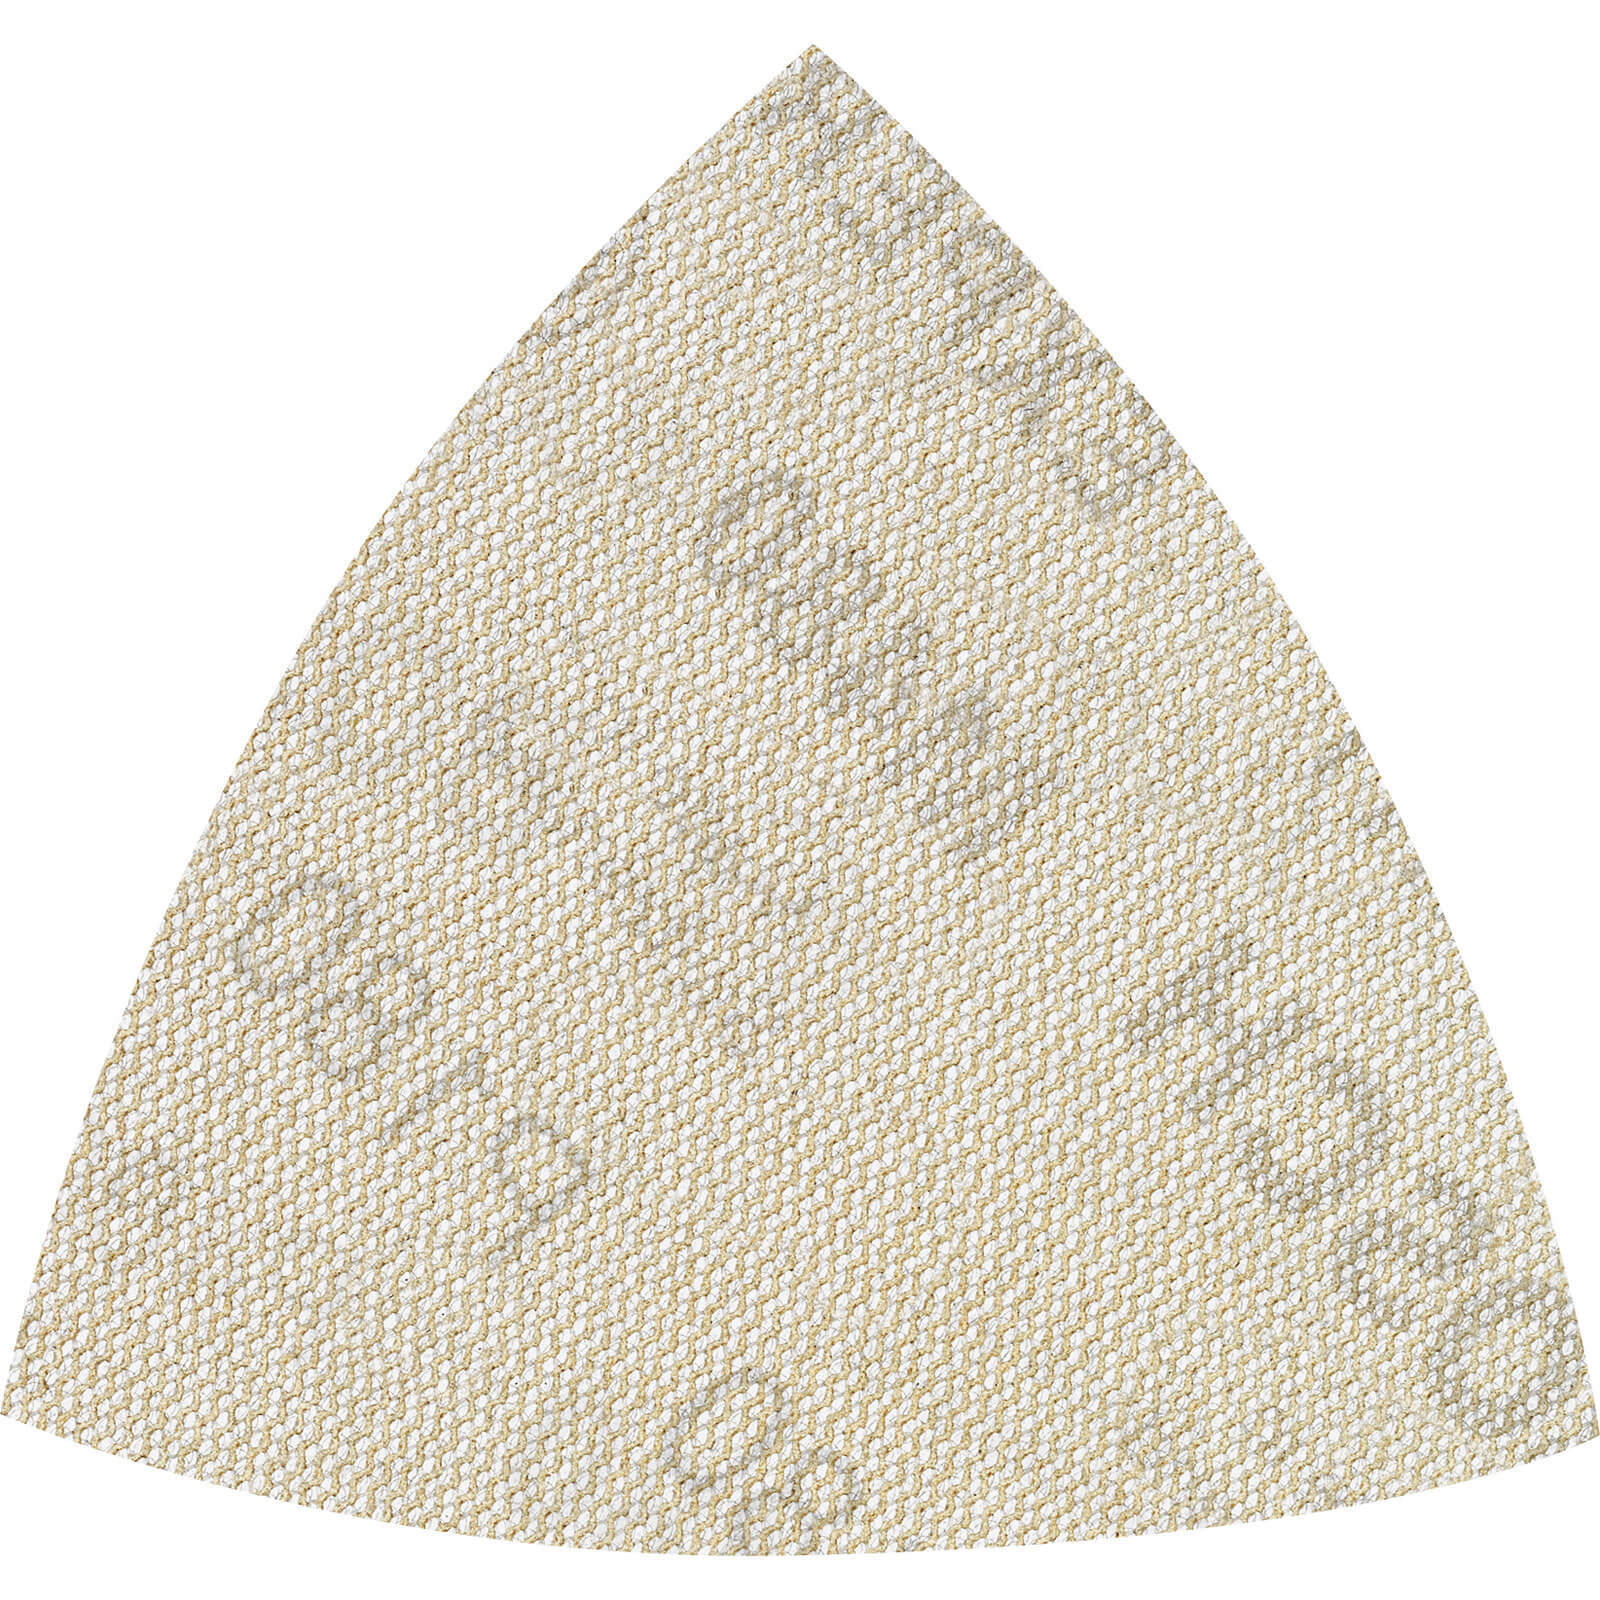 Image of Bosch Expert M480 Quick Fit Net Delta Sanding Sheets for Paint and Wood 93mm x 93mm 180g Pack of 5